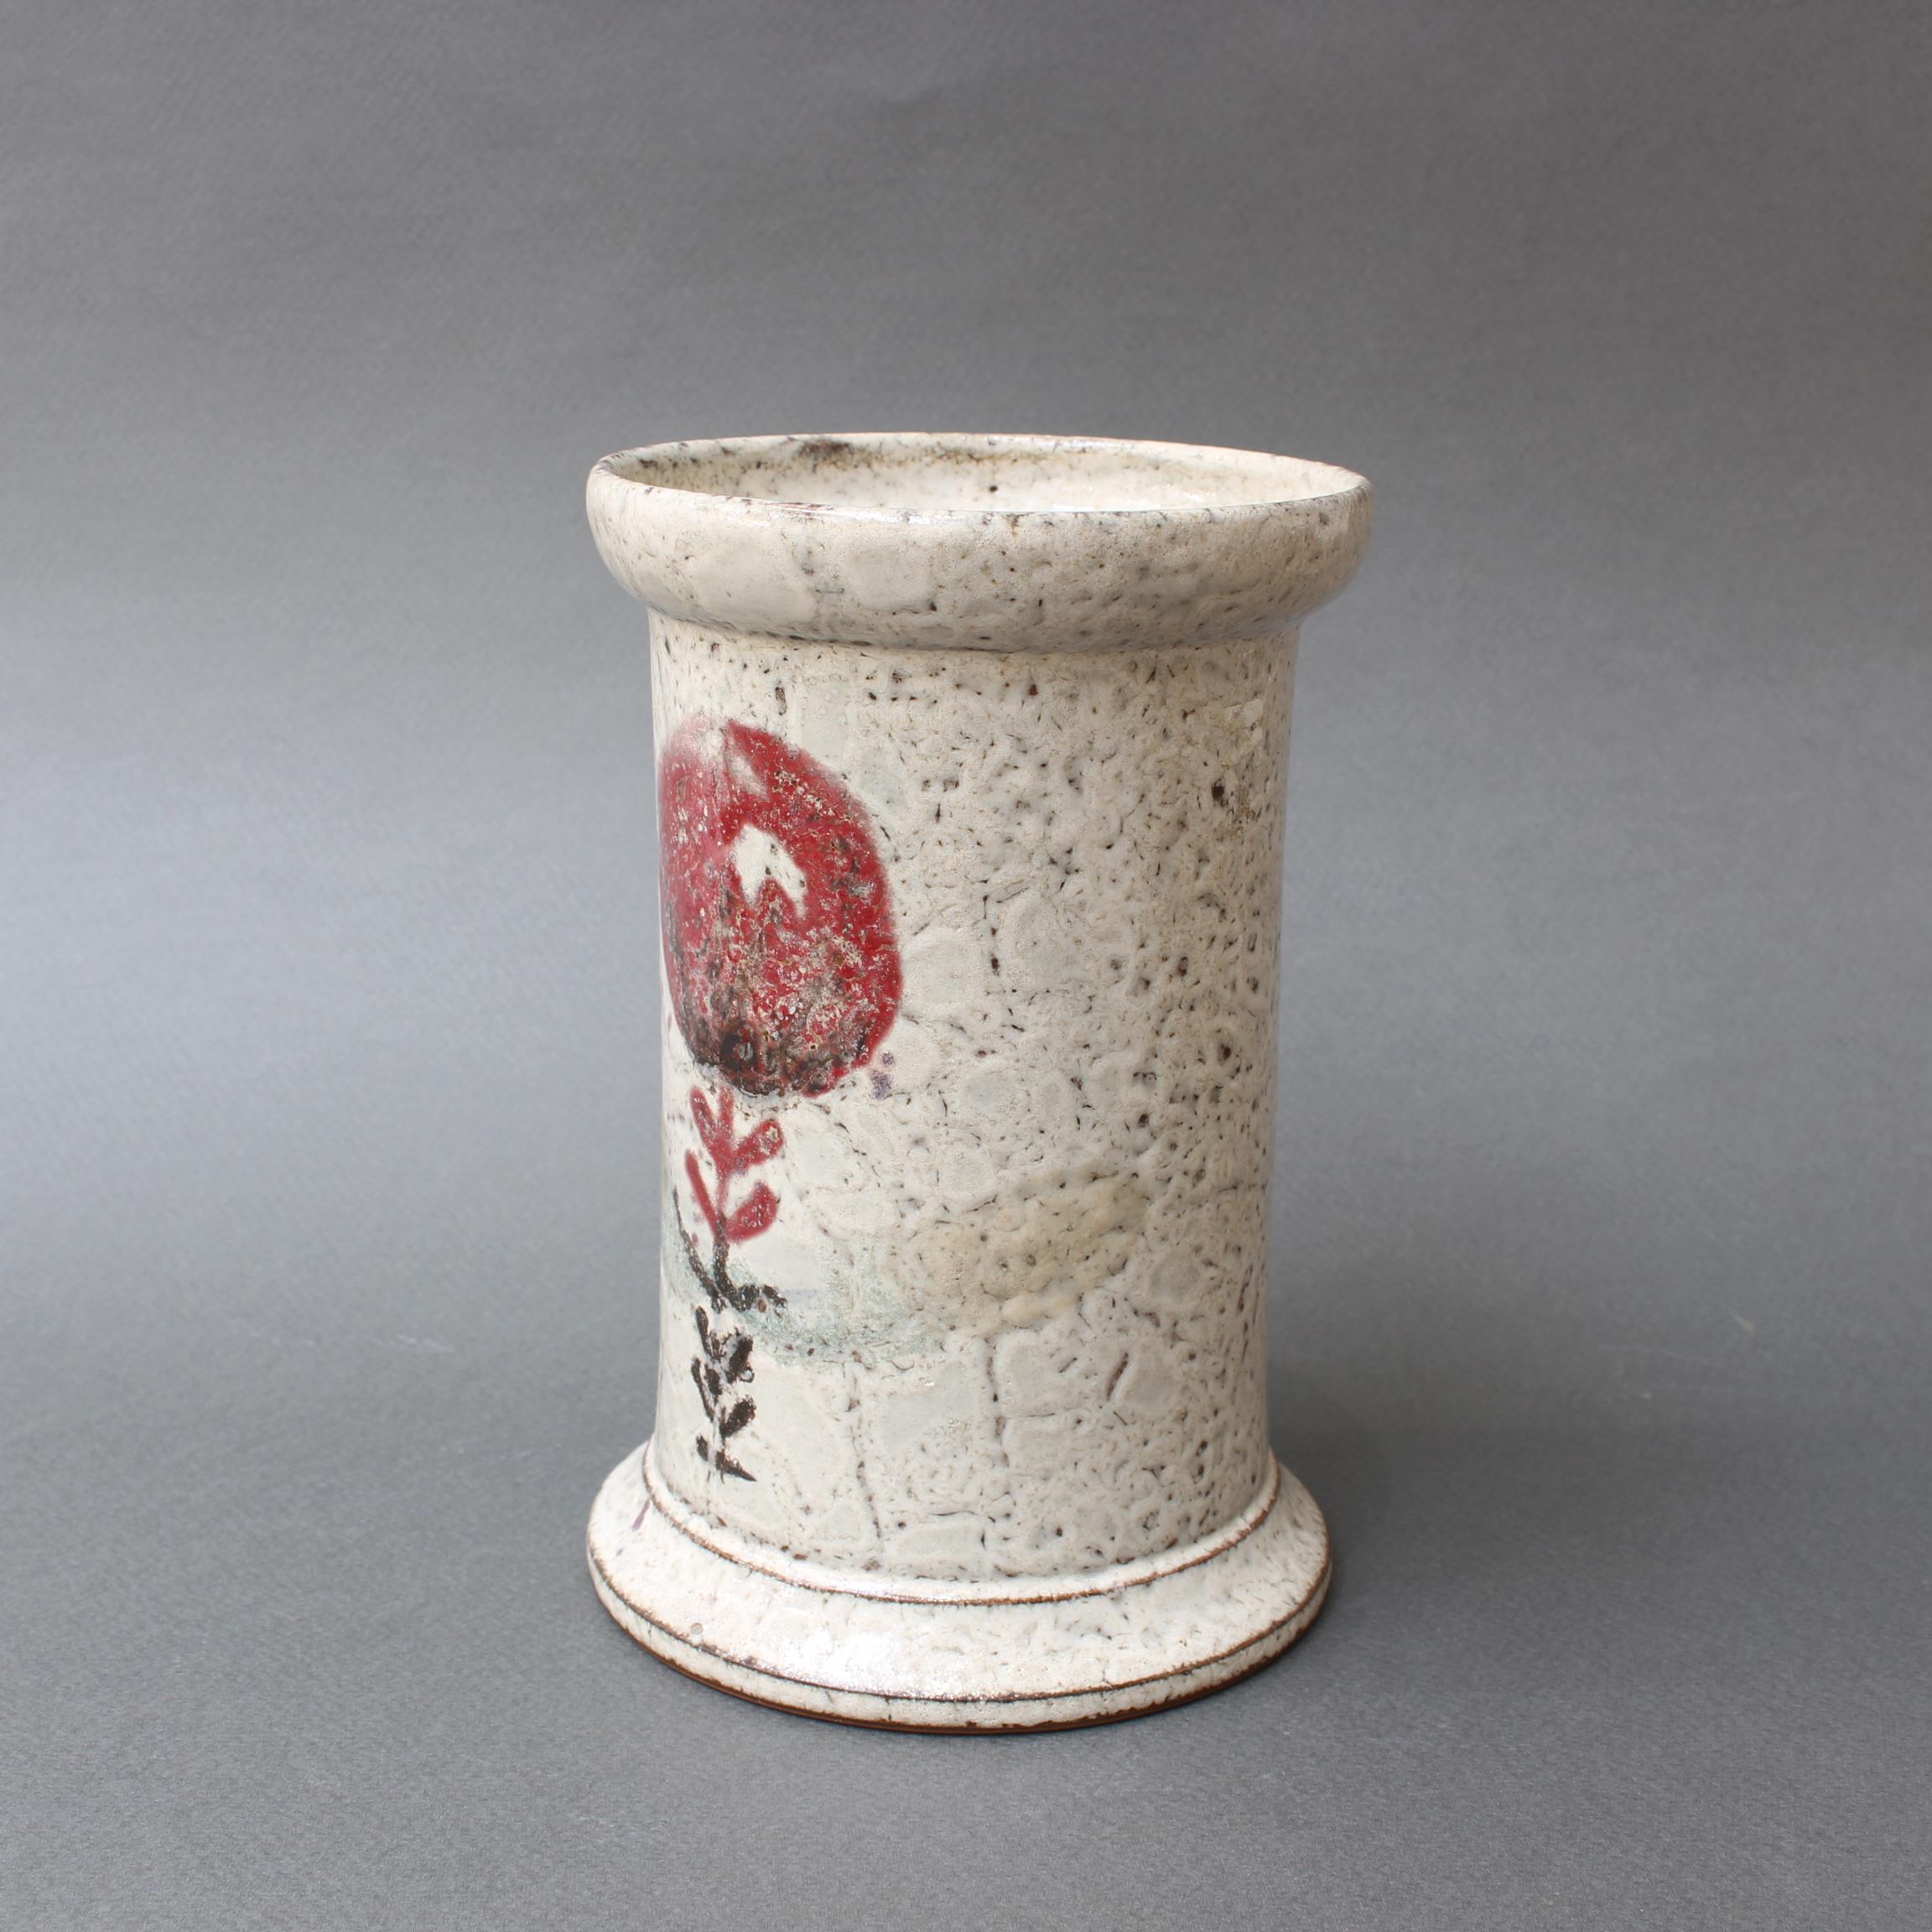 French ceramic jar with flower motif by Gustave Reynaud, (circa 1950s). Delightfully rustic earthenware piece with decor of a red, round flower and stylized rosemary herb branch on the opposite side of the vessel. In fair vintage condition